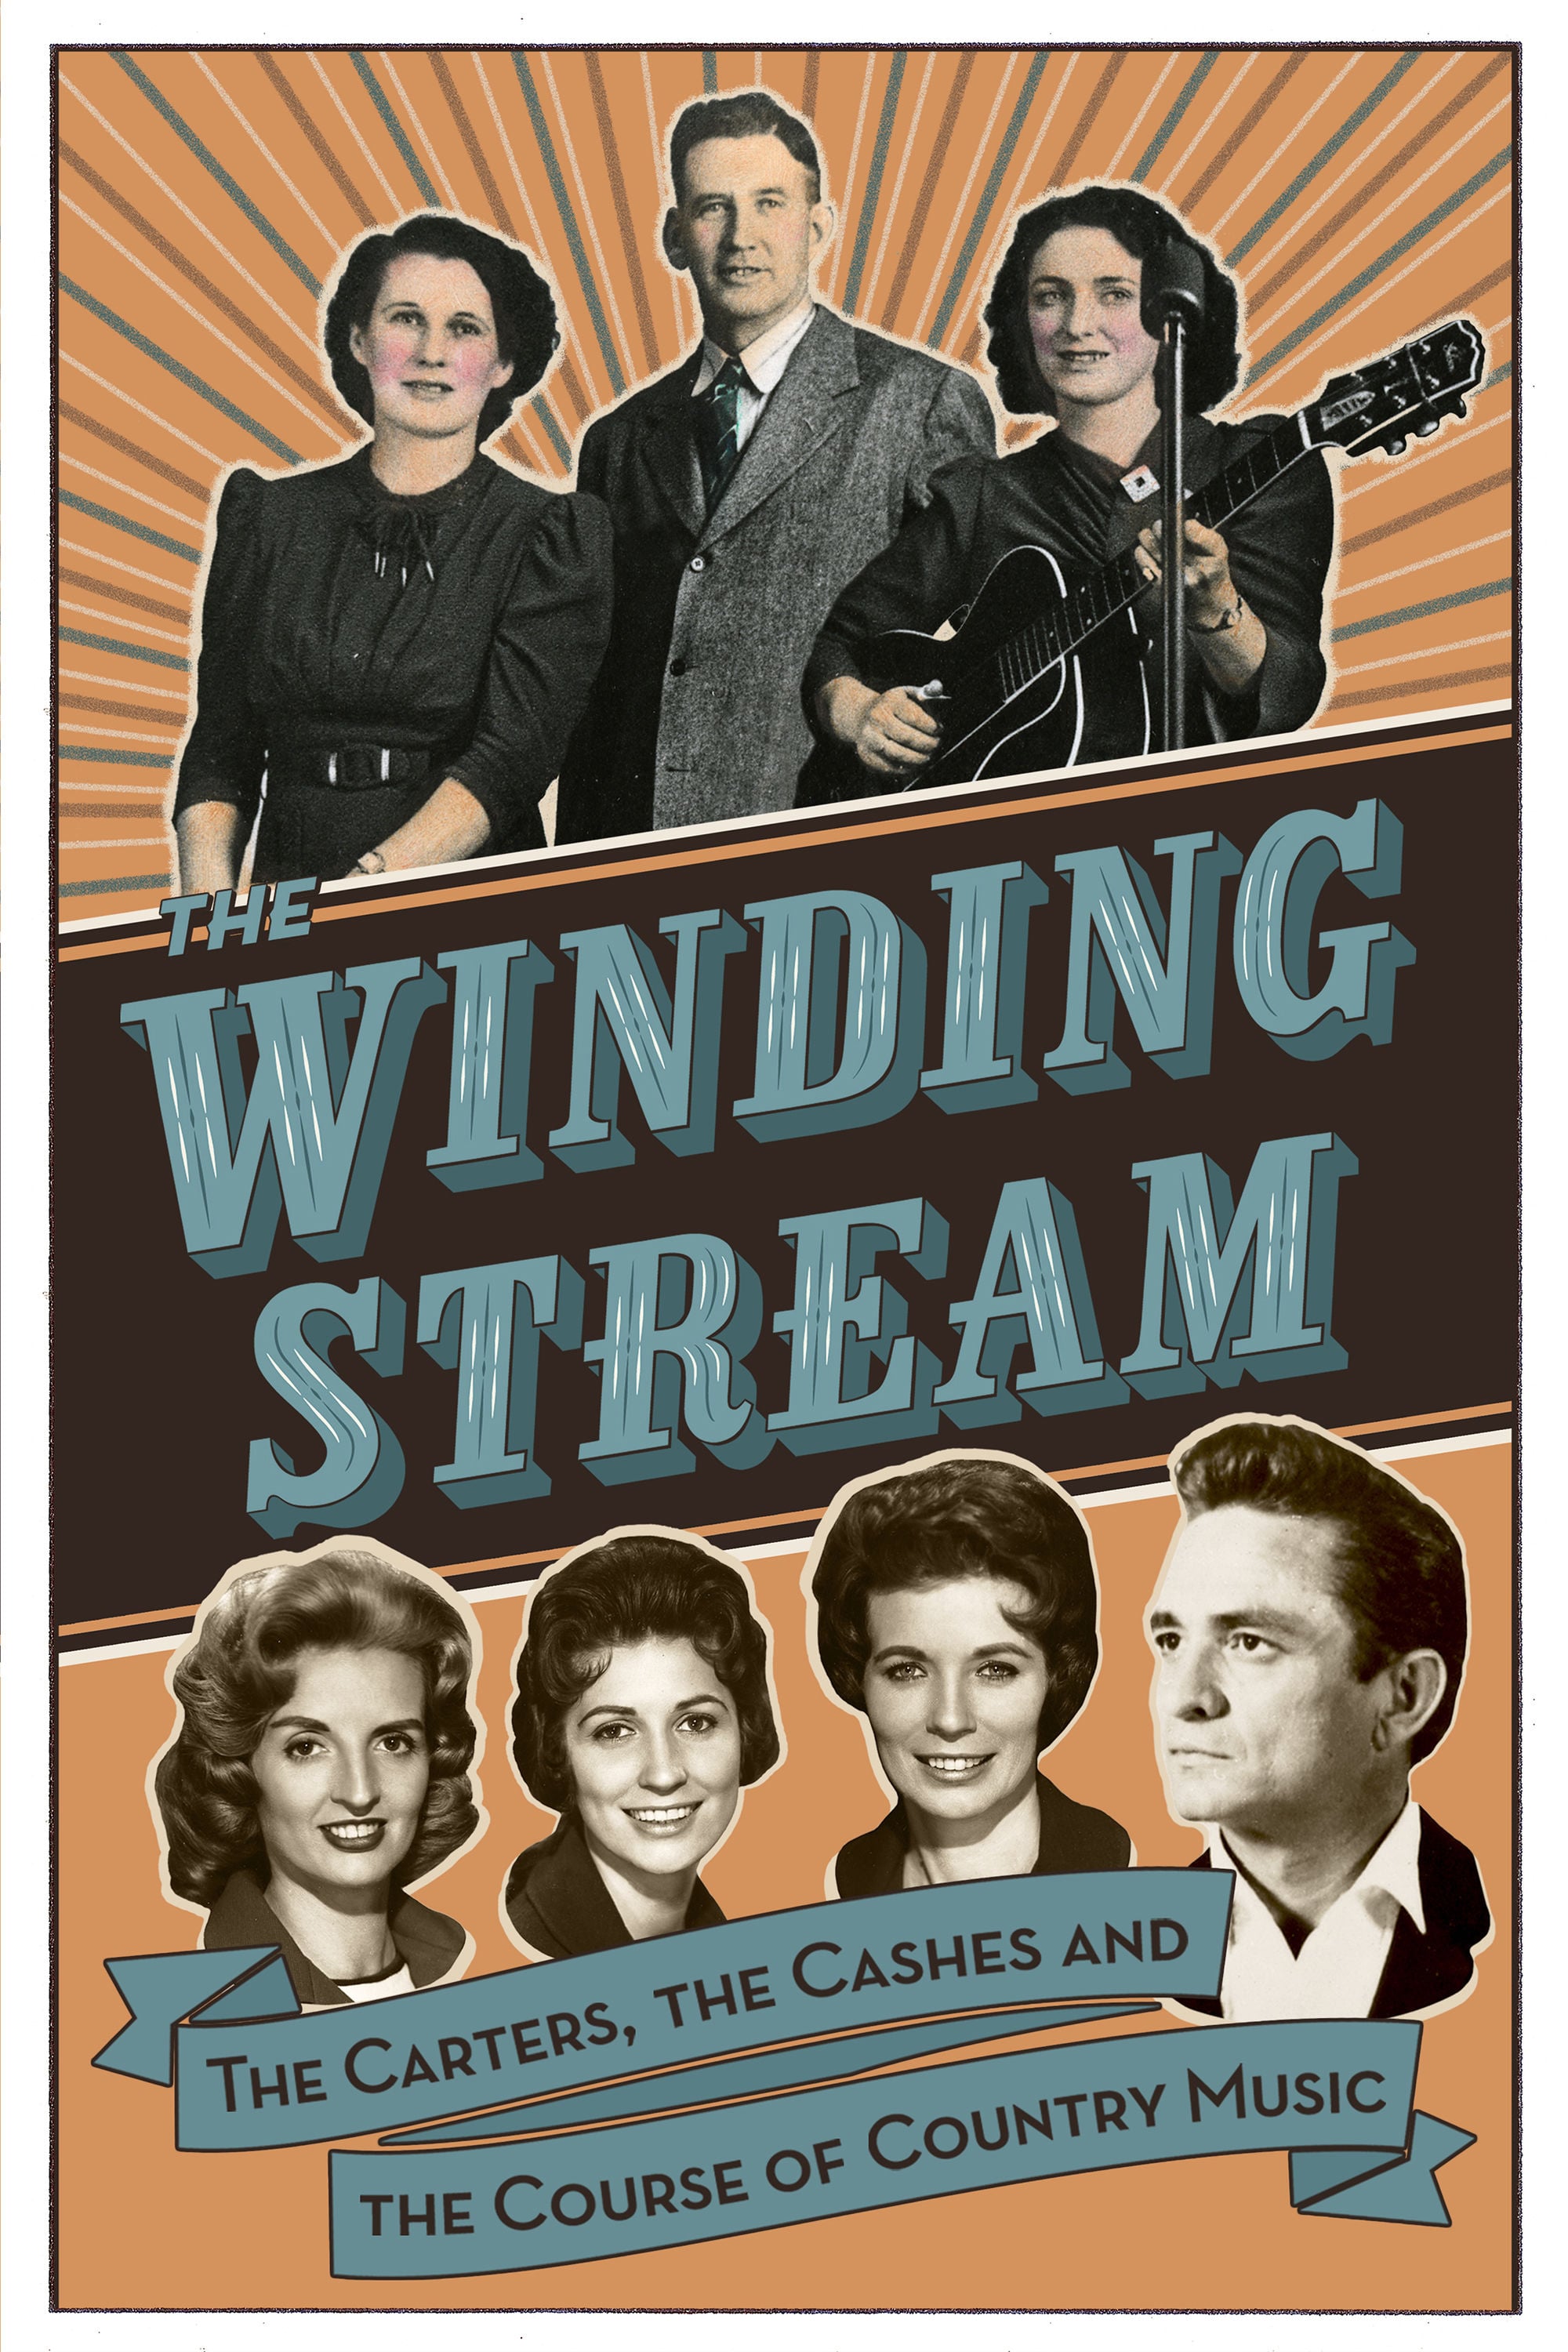 The Winding Stream: The Carters, the Cashes, and the Course of Country Music Poster